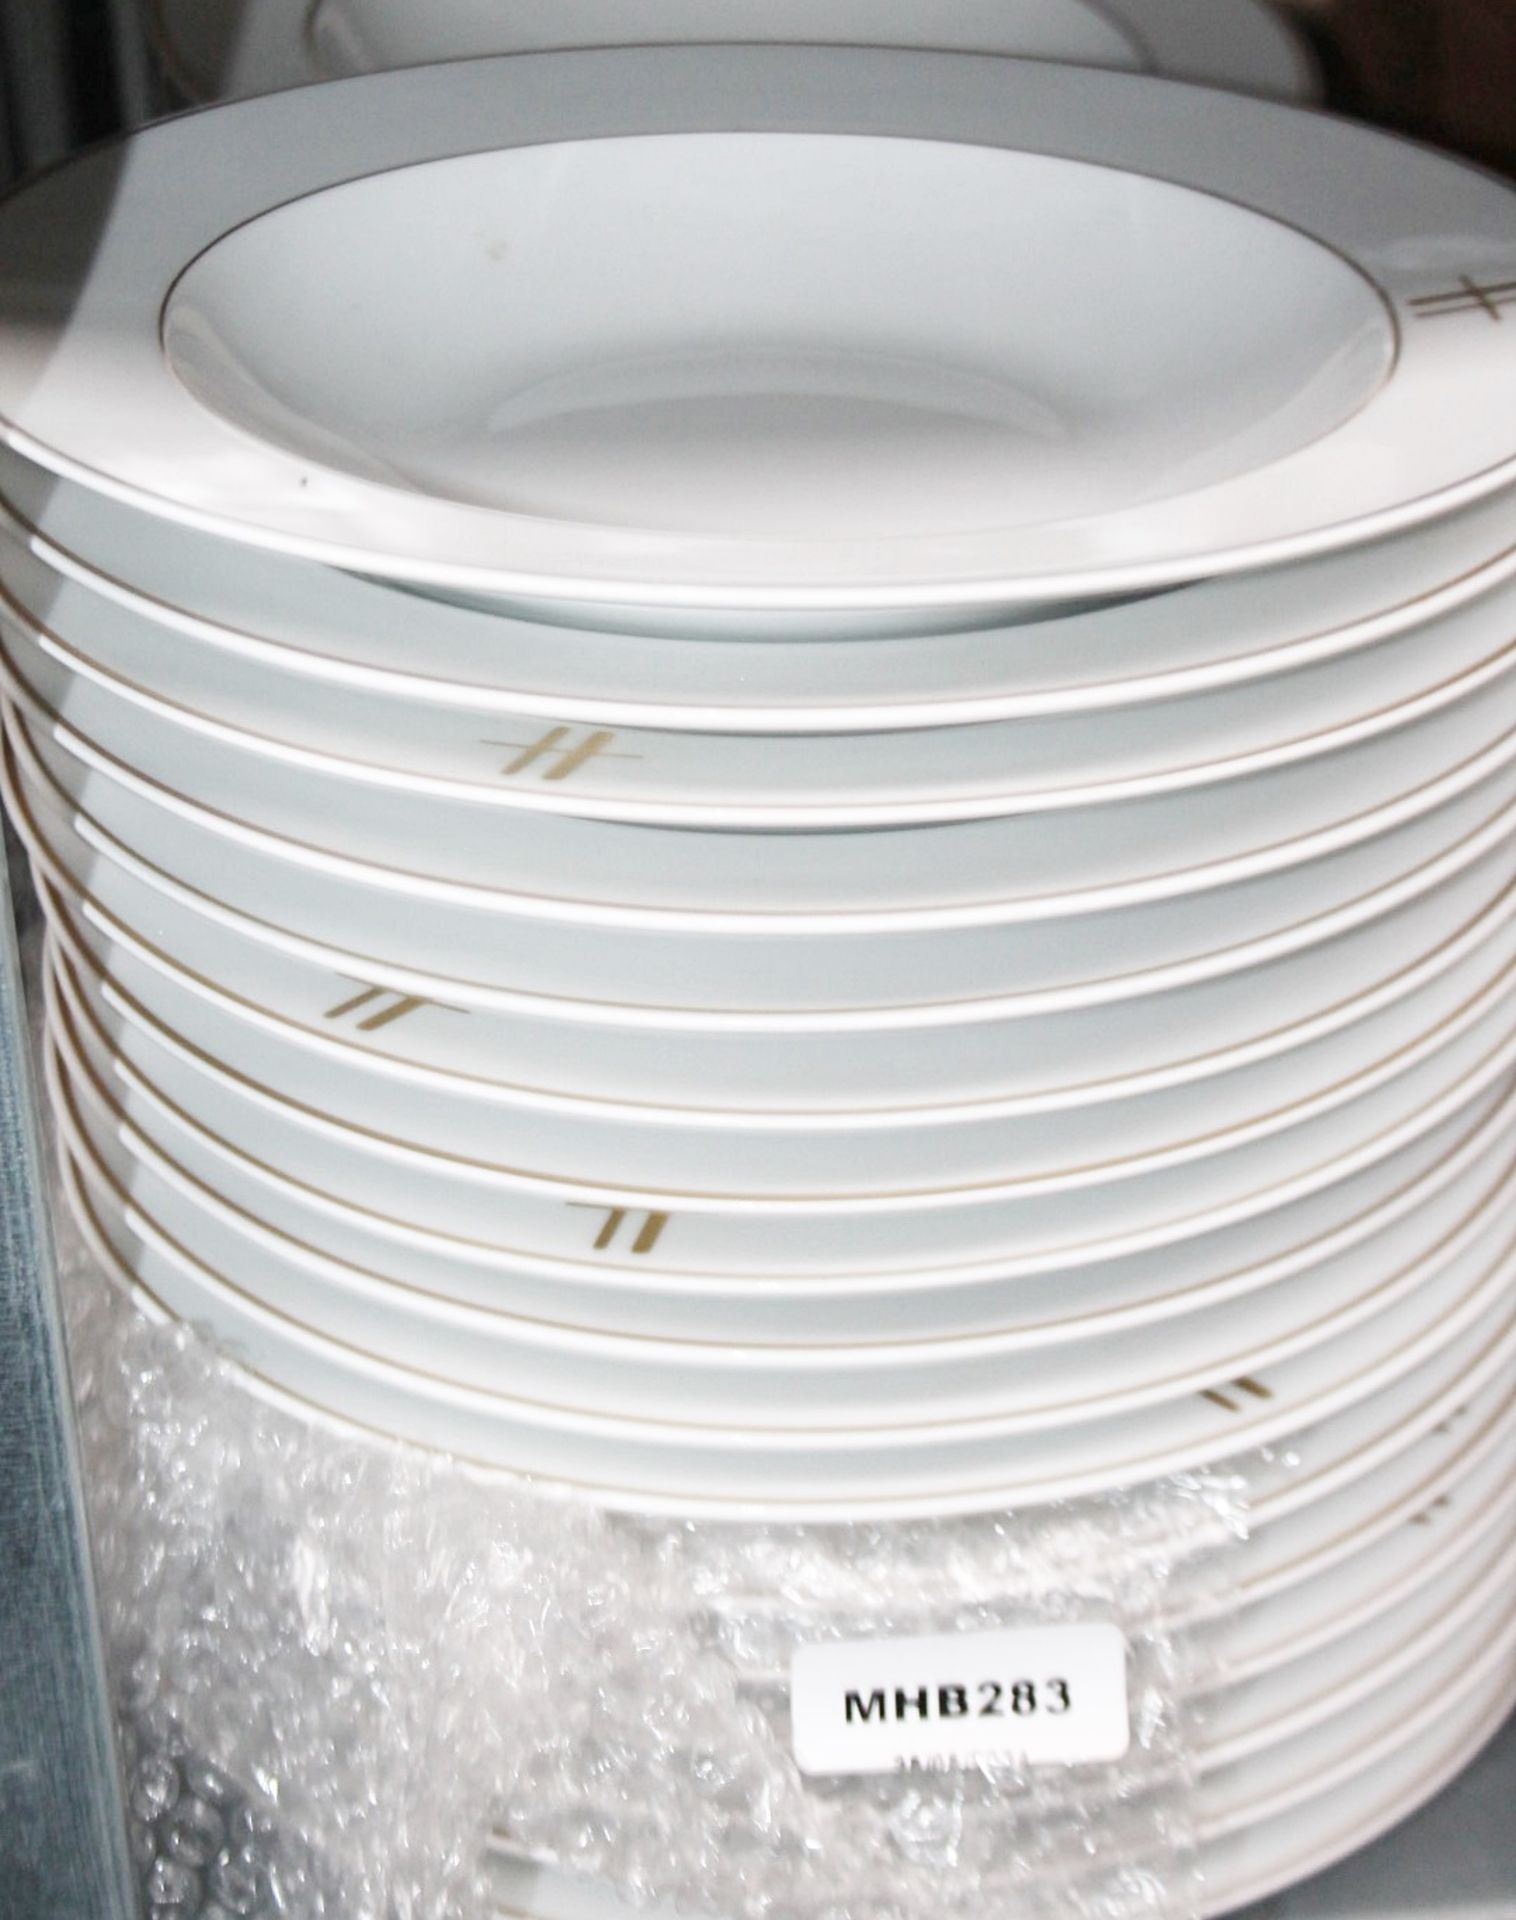 32 x PILLIVUYT Porcelain Pasta / Soup Plates In White Featuring 'Famous Branding' In Gold - - Image 3 of 6